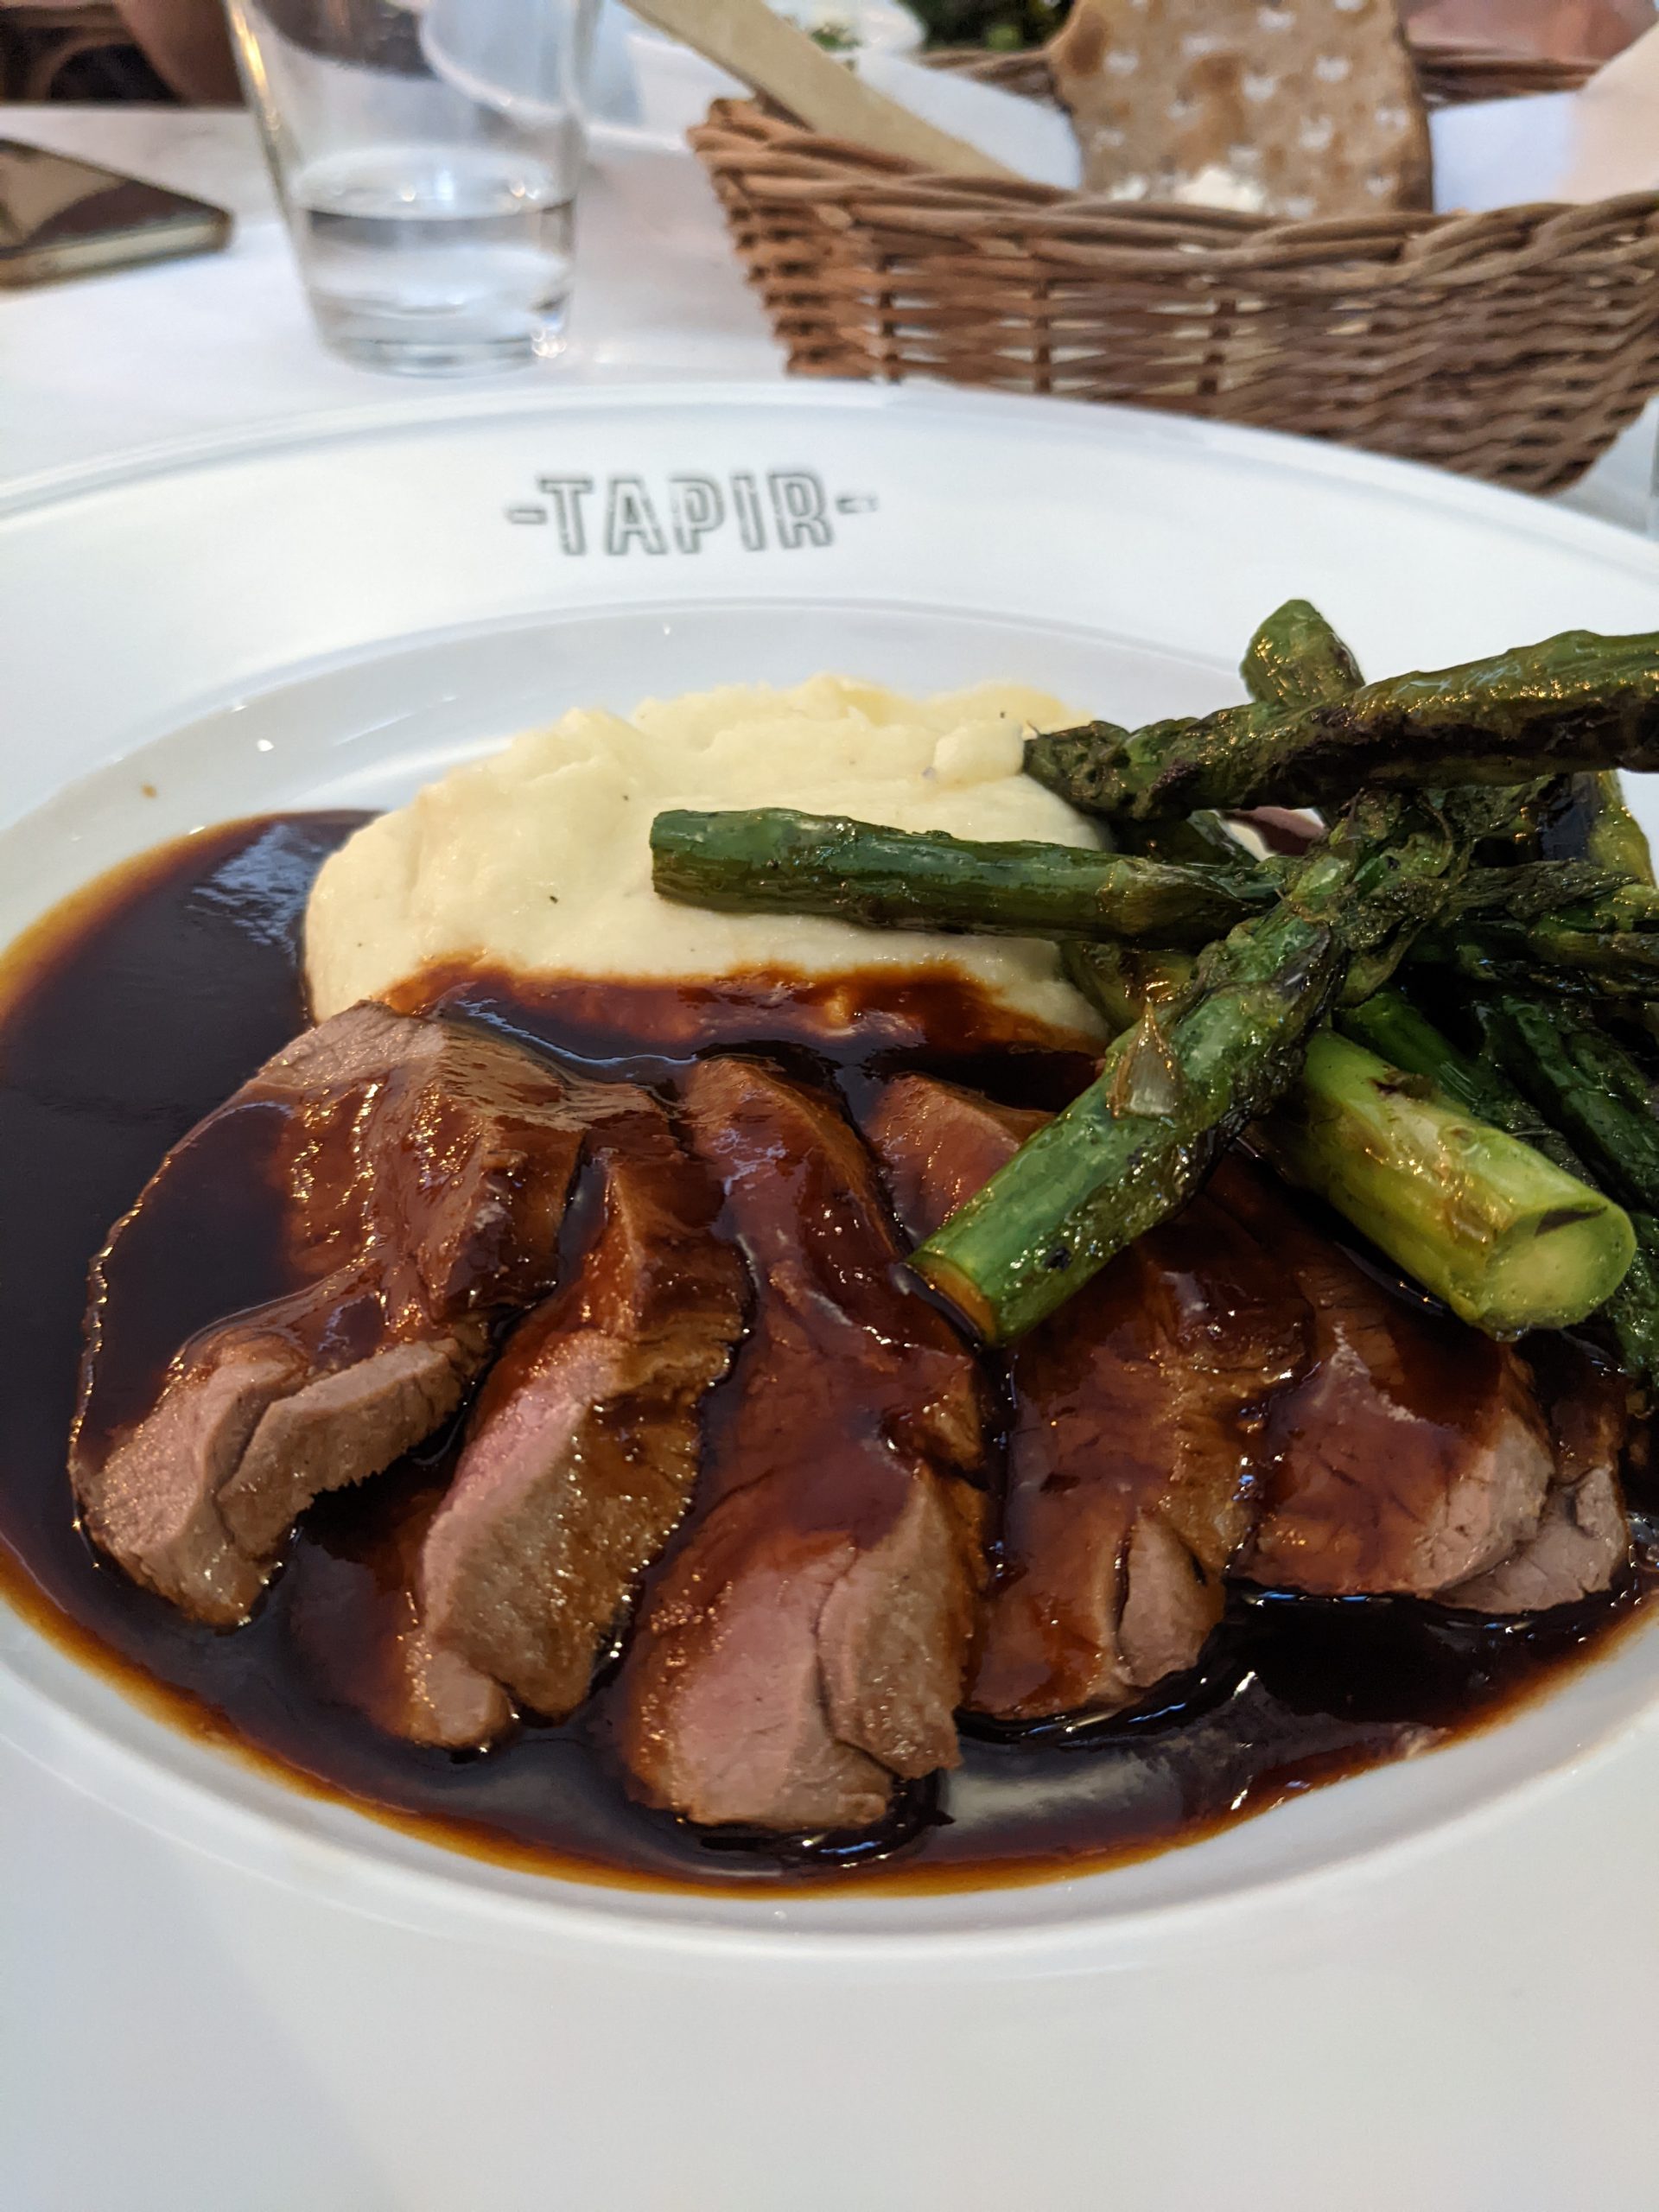 A plate with slices of meat in gravy with mashed potatoes and asparagus